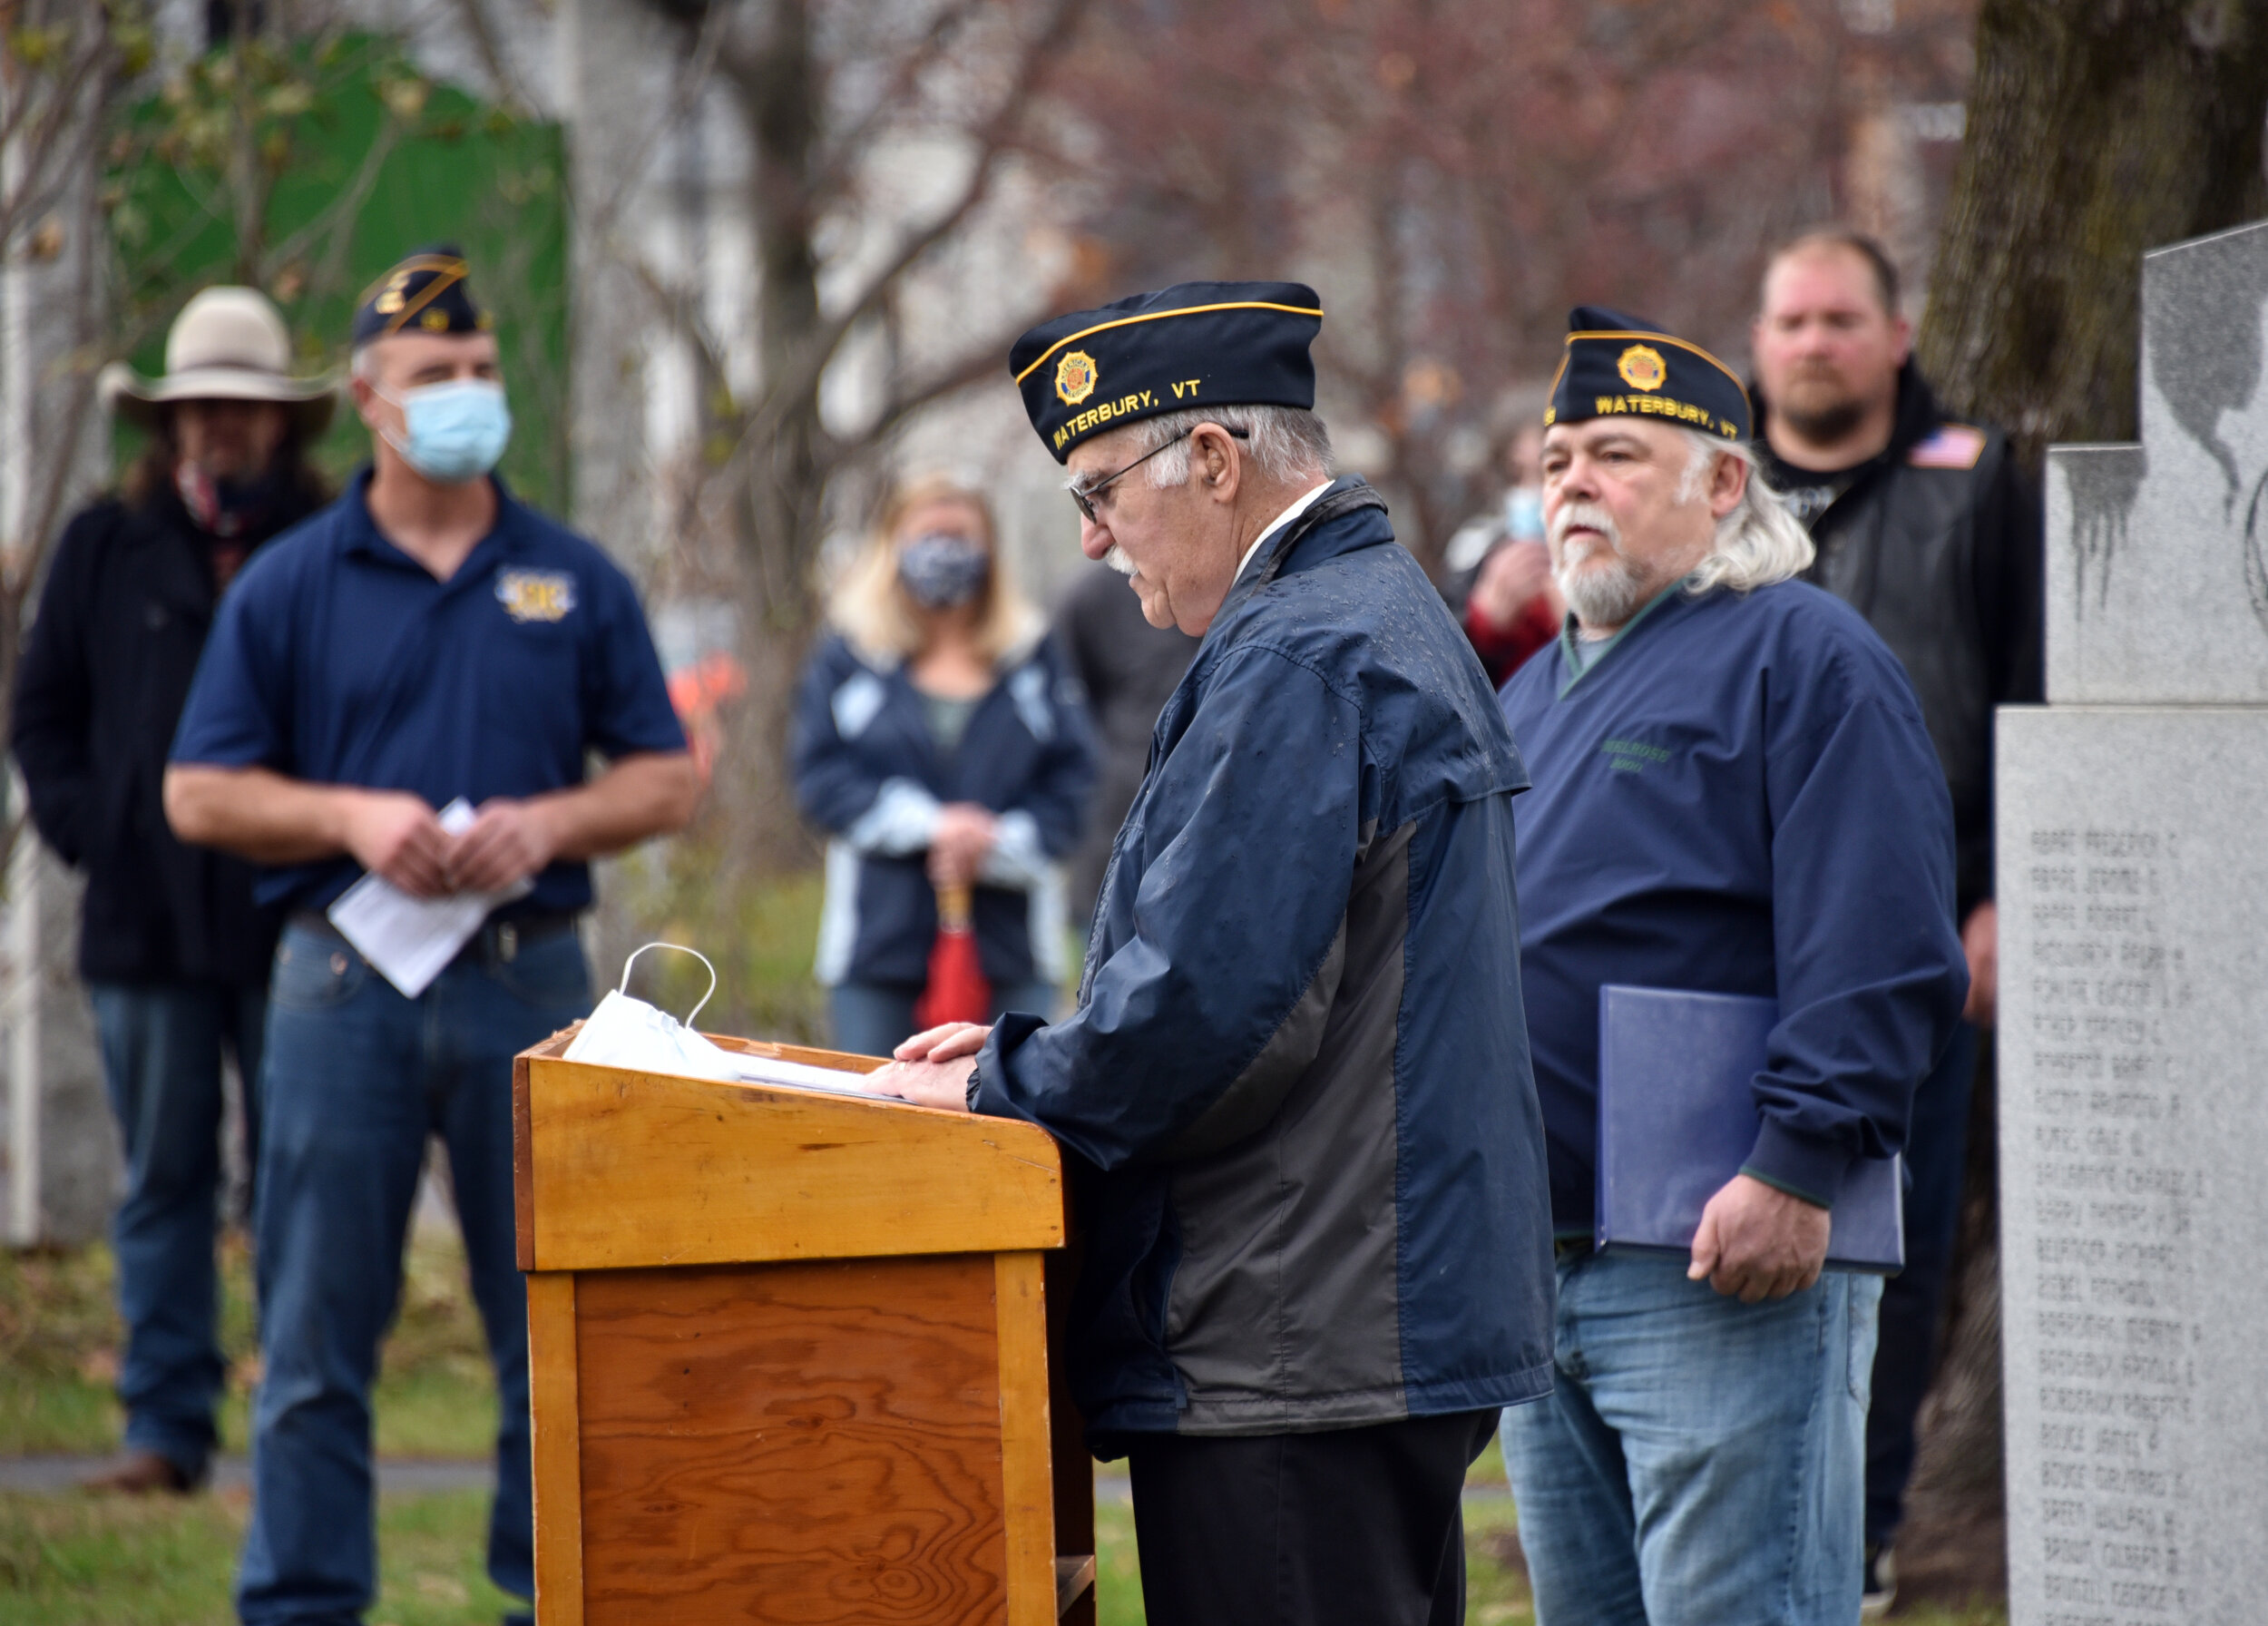   At 11 a.m., Alonzo Perry, commander of the American Legion Post 59, leads a solemn ceremony held each year on Nov. 11 originally chosen to commemorate the day marking the armistice signed between the allies of World War I and Germany to end hostili